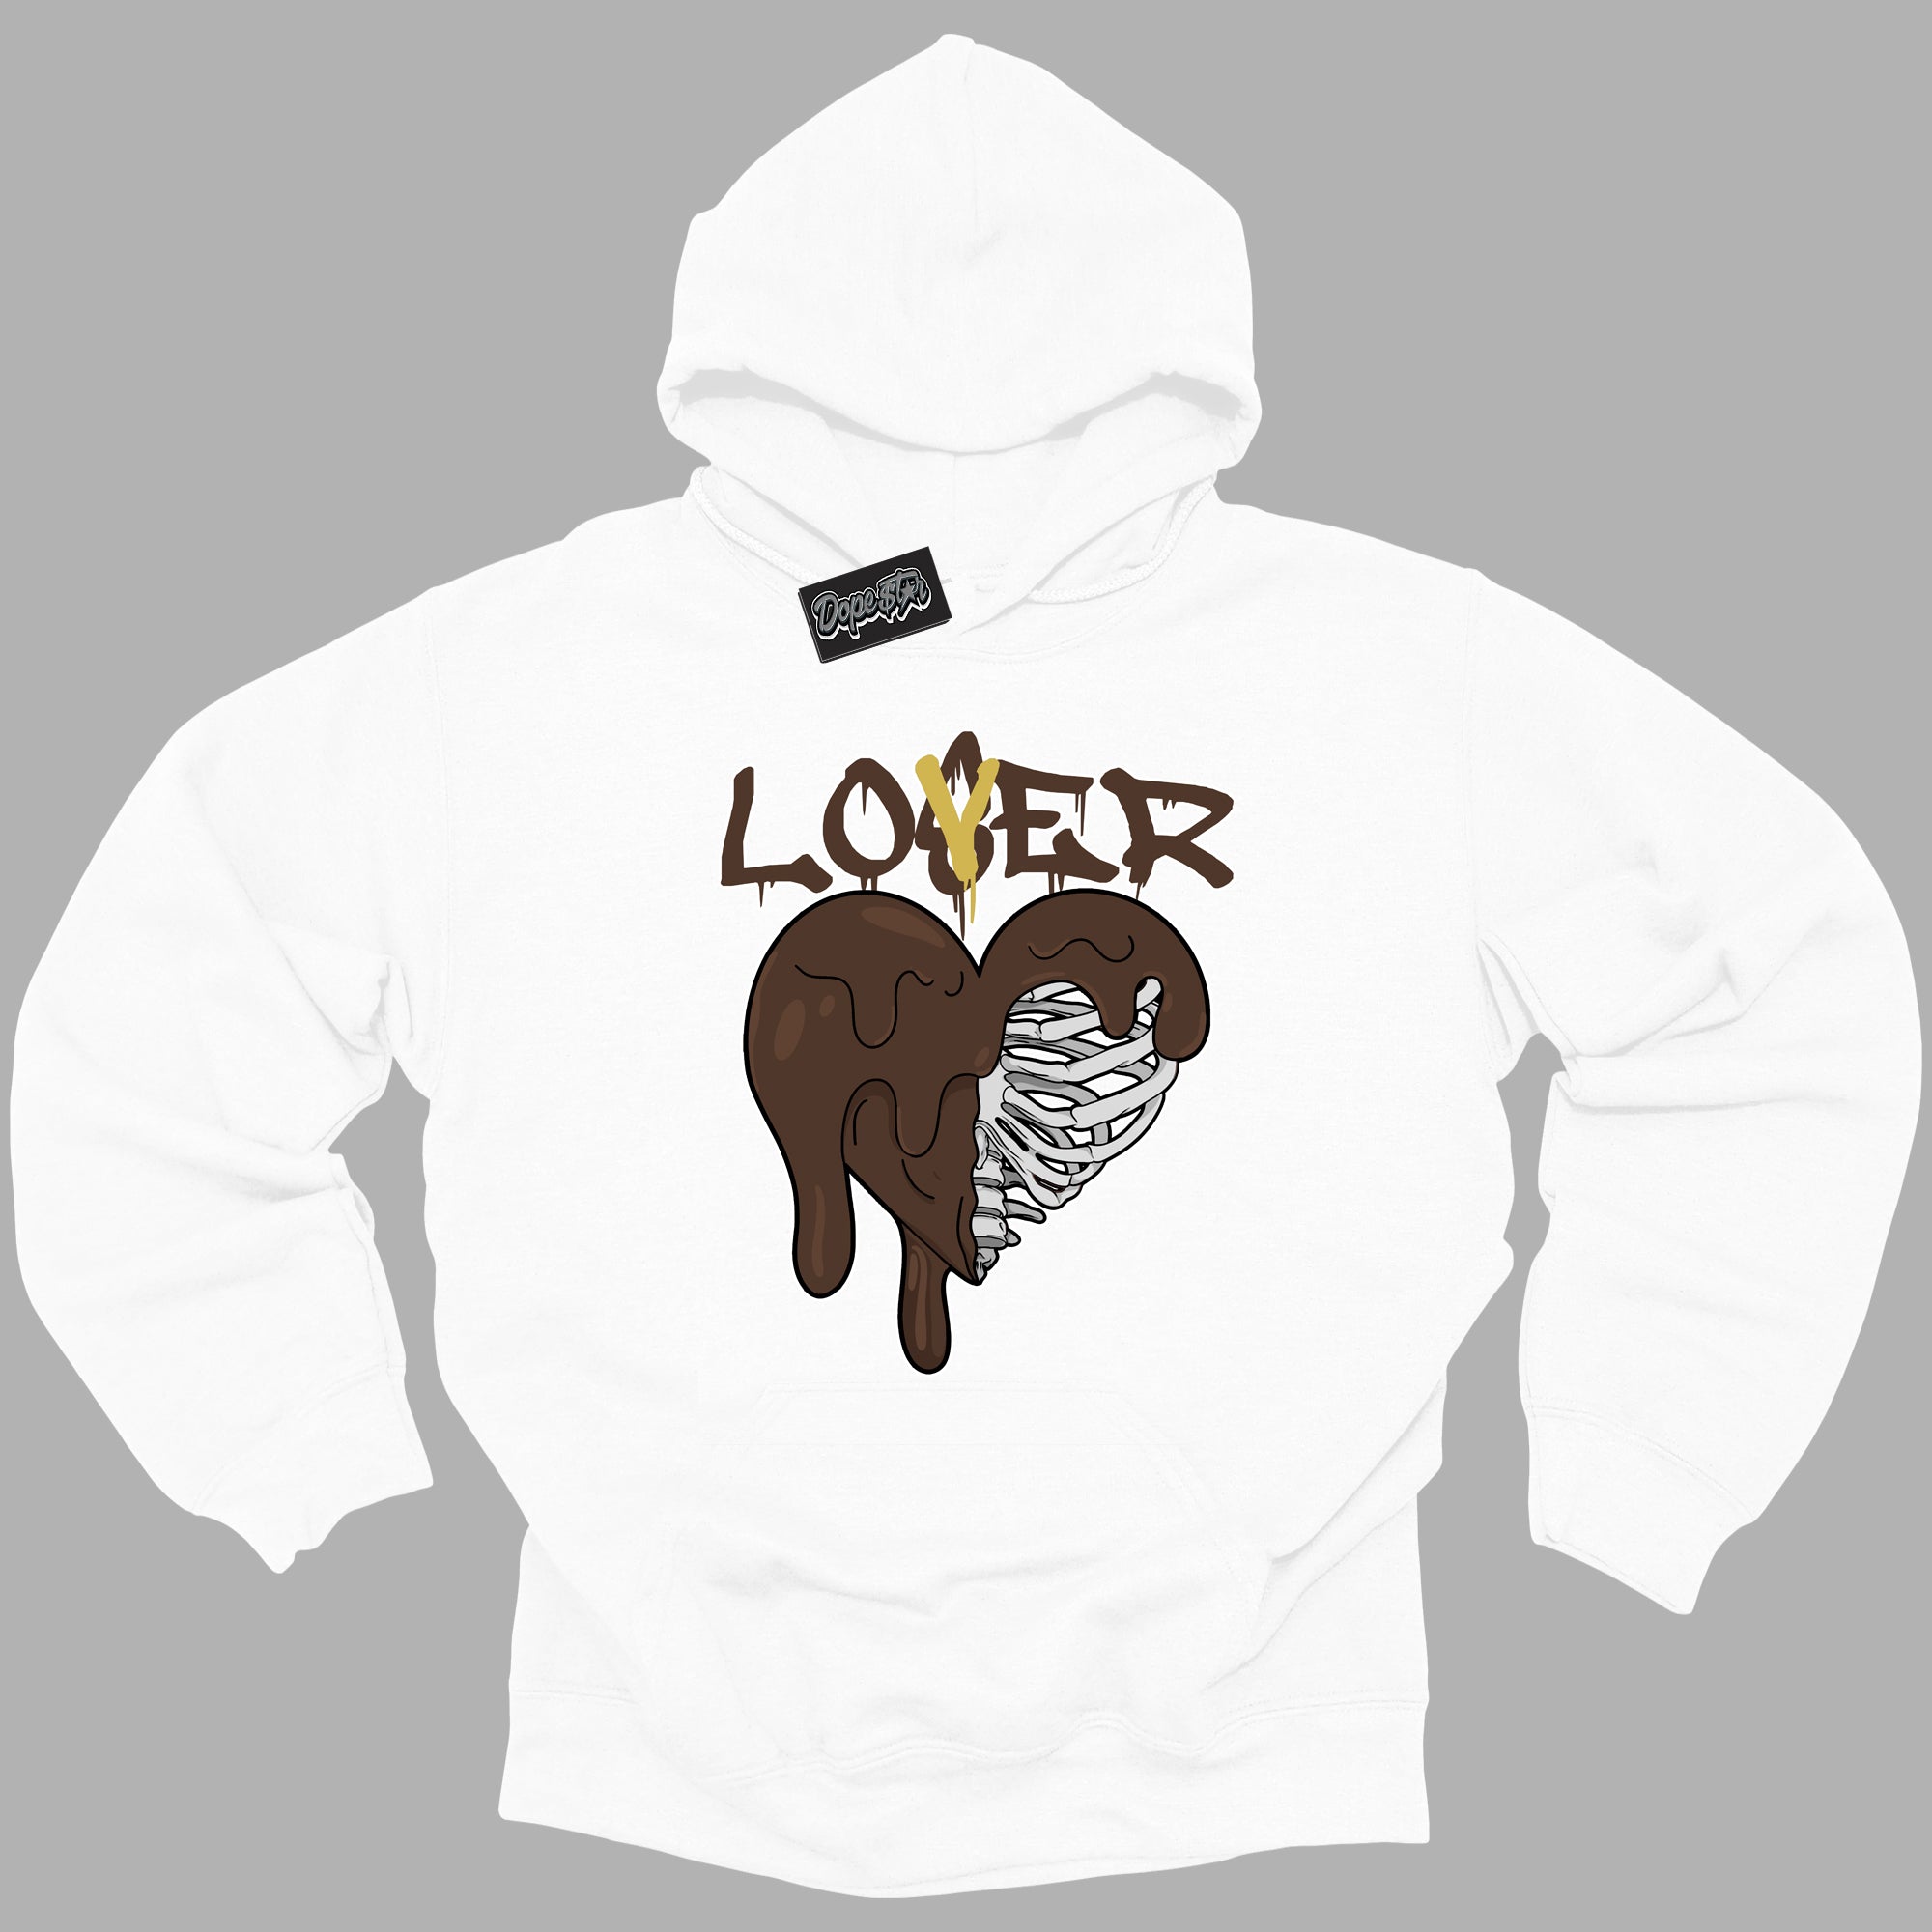 Cool White Graphic DopeStar Hoodie with “ Lover Loser “ print, that perfectly matches Palomino 1s sneakers